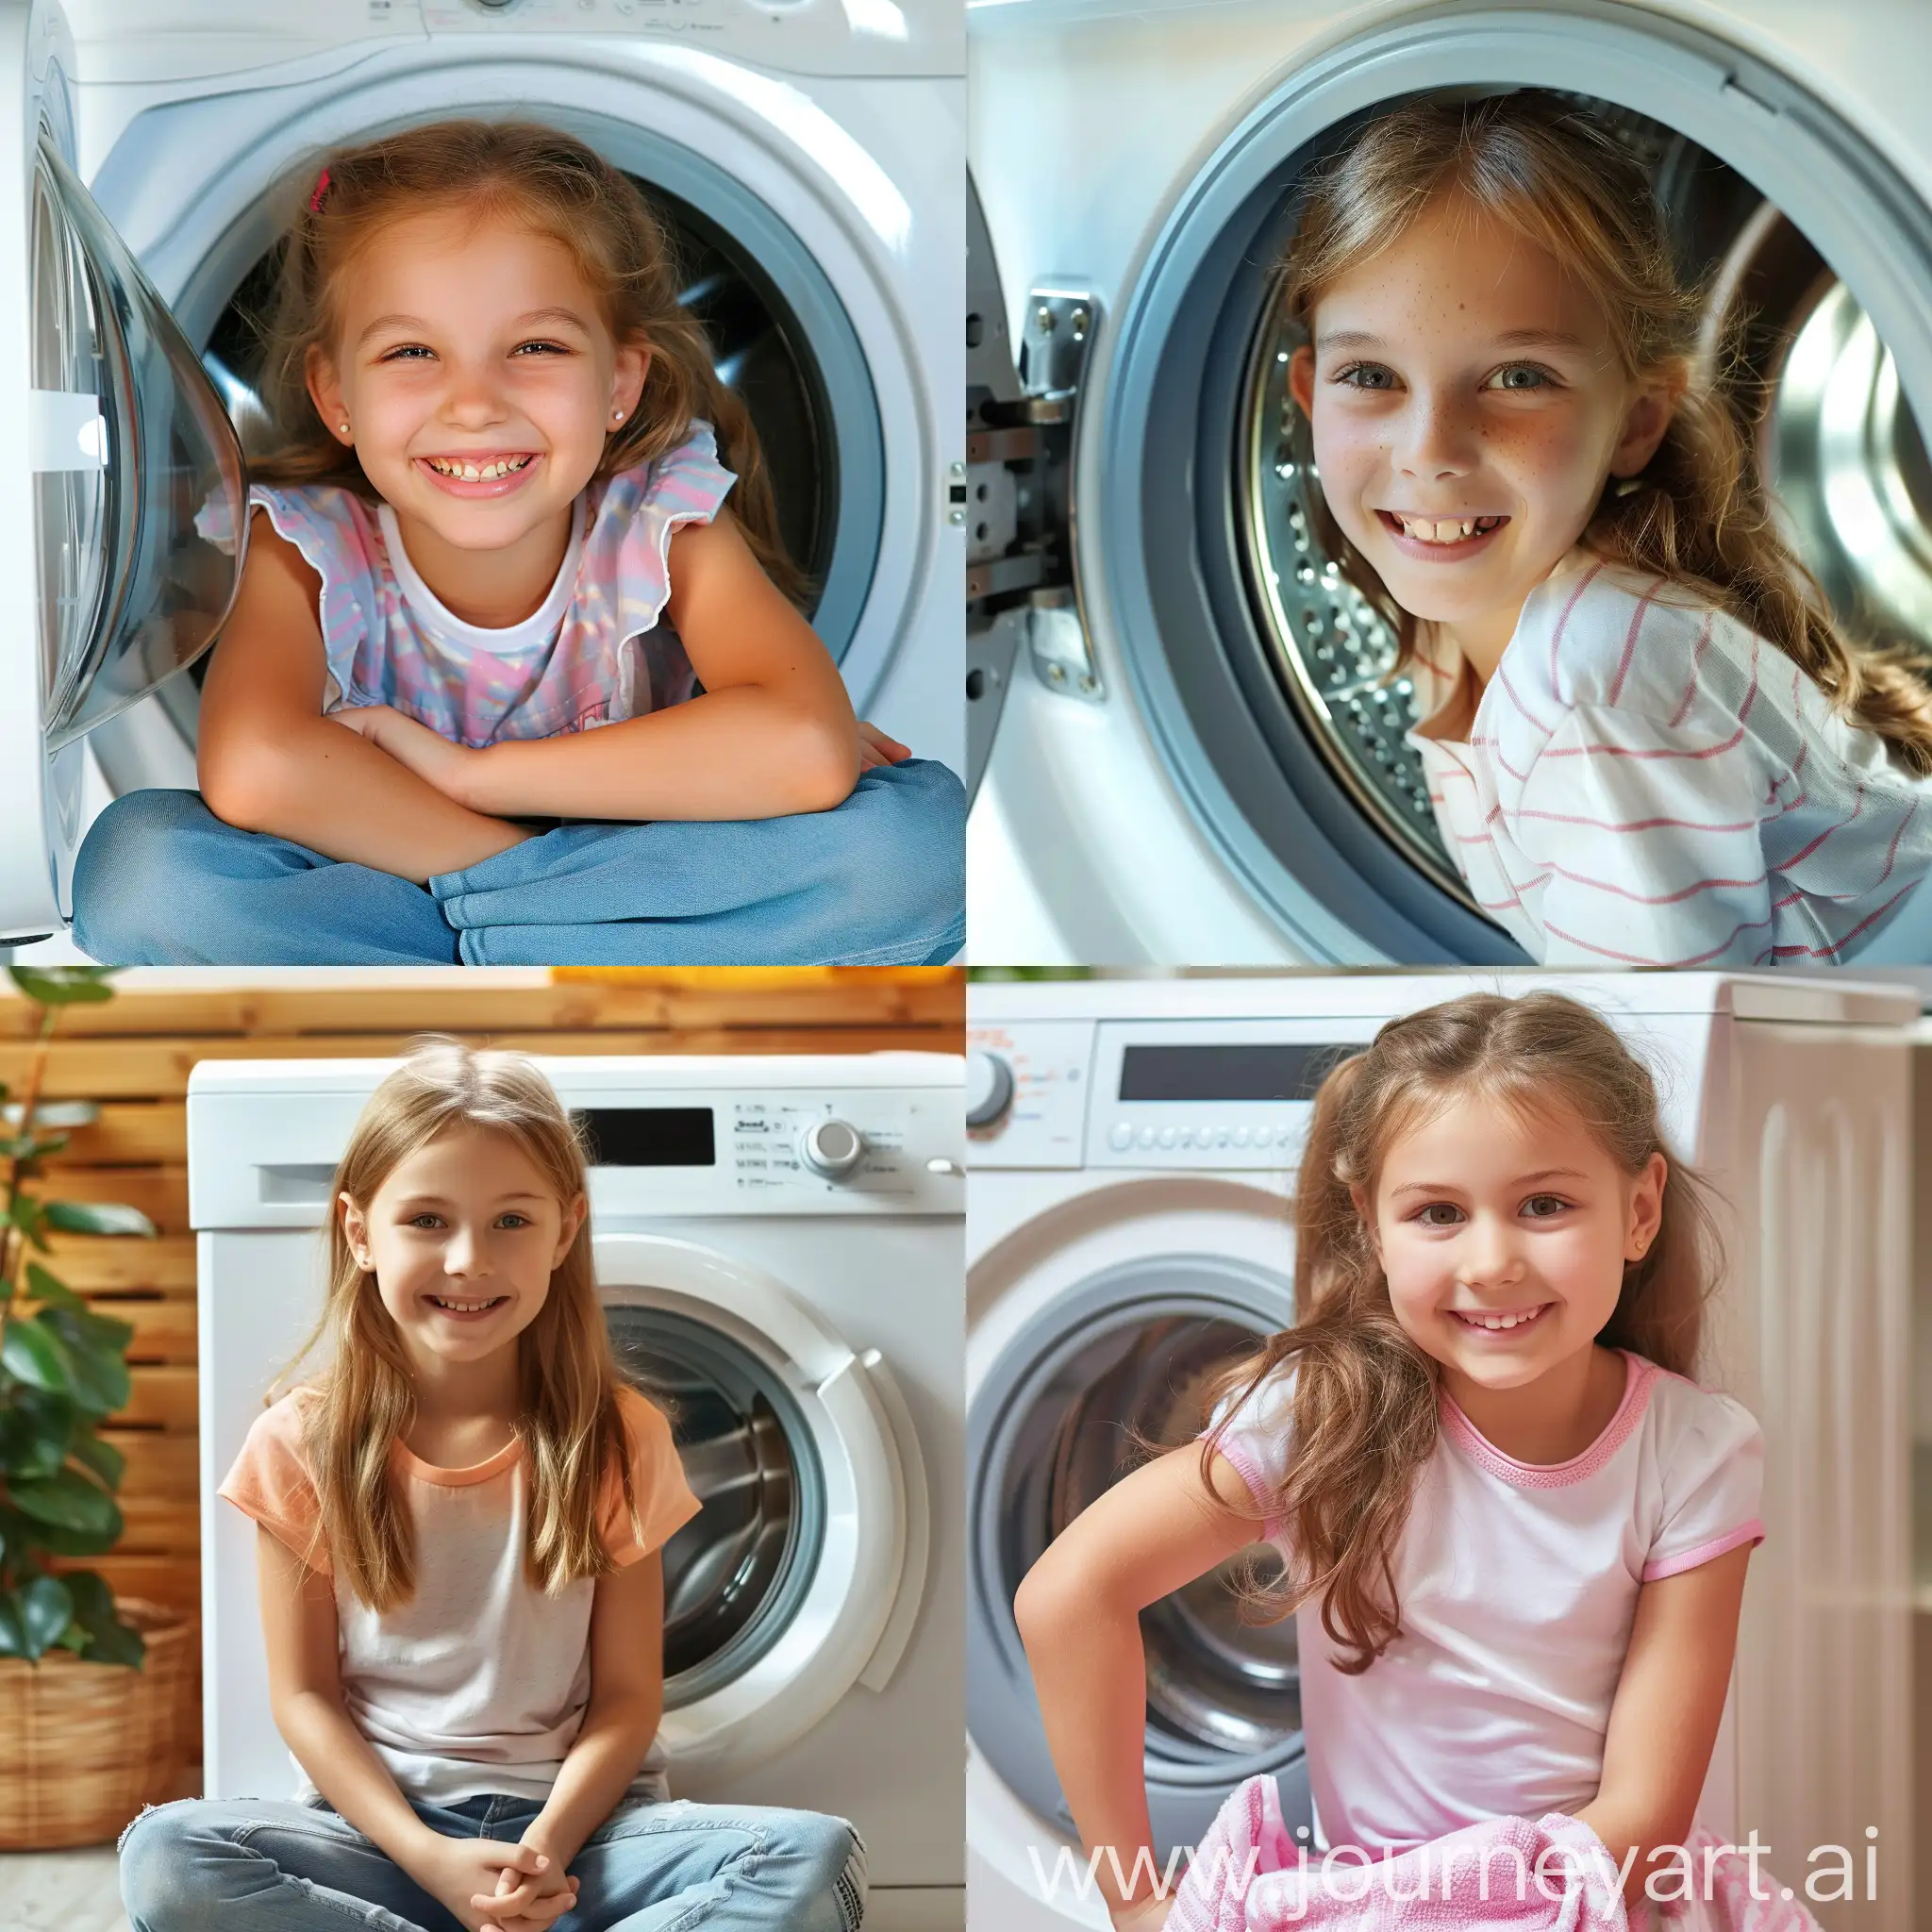 Cheerful-Schoolgirl-Doing-Laundry-in-Modern-Front-Loader-Washing-Machine